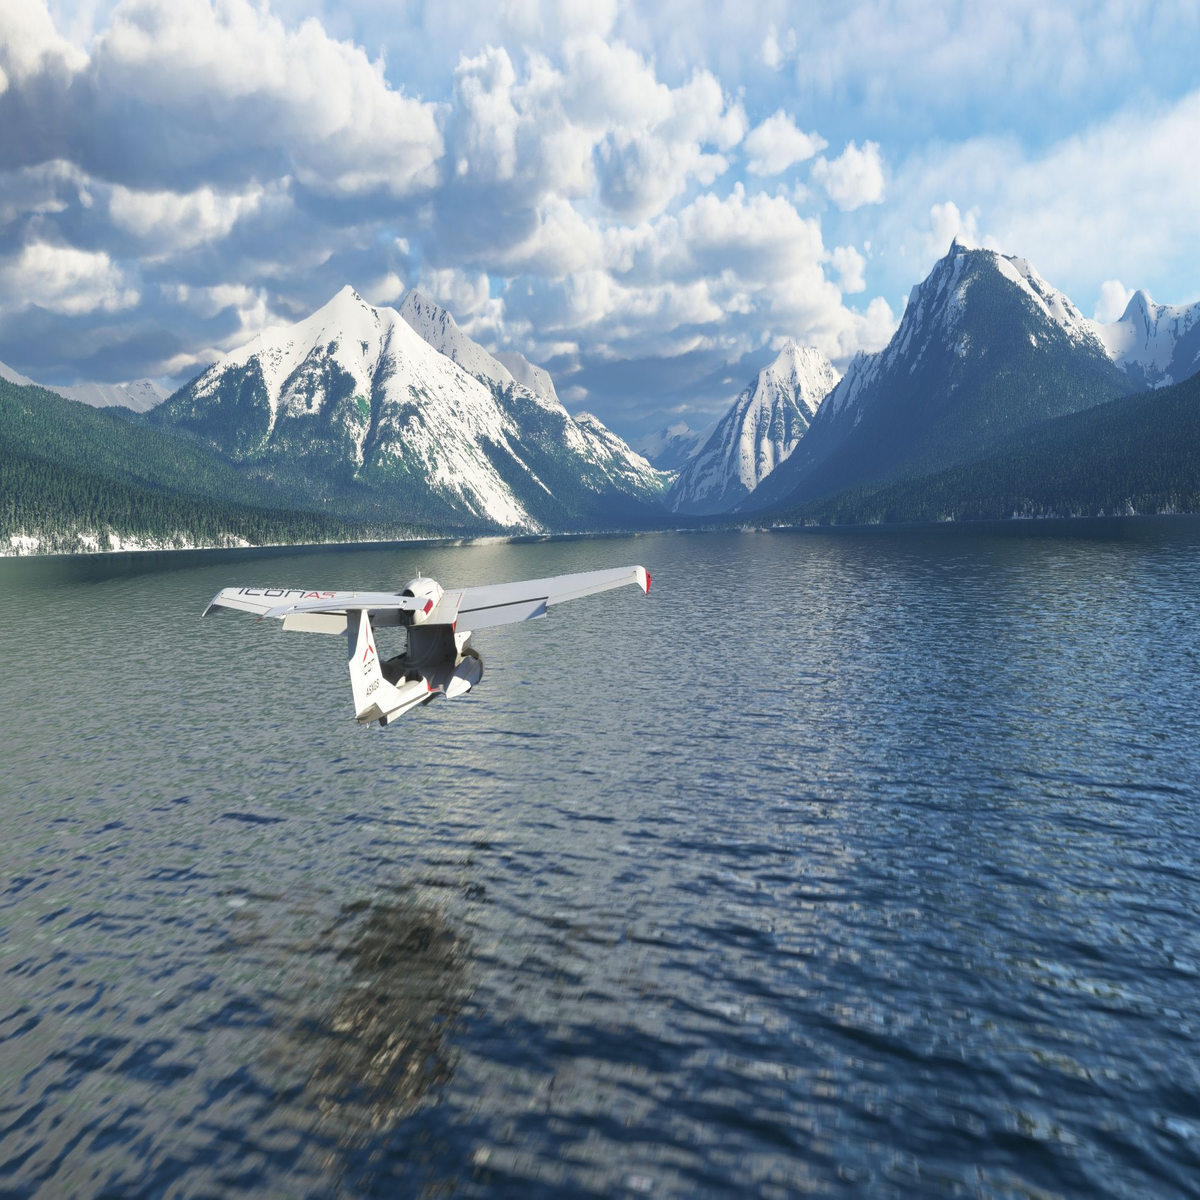 RELEASE] (1.26.5.0) World Update X: United States and US Territories Now  Available! - News & Announcements - Microsoft Flight Simulator Forums